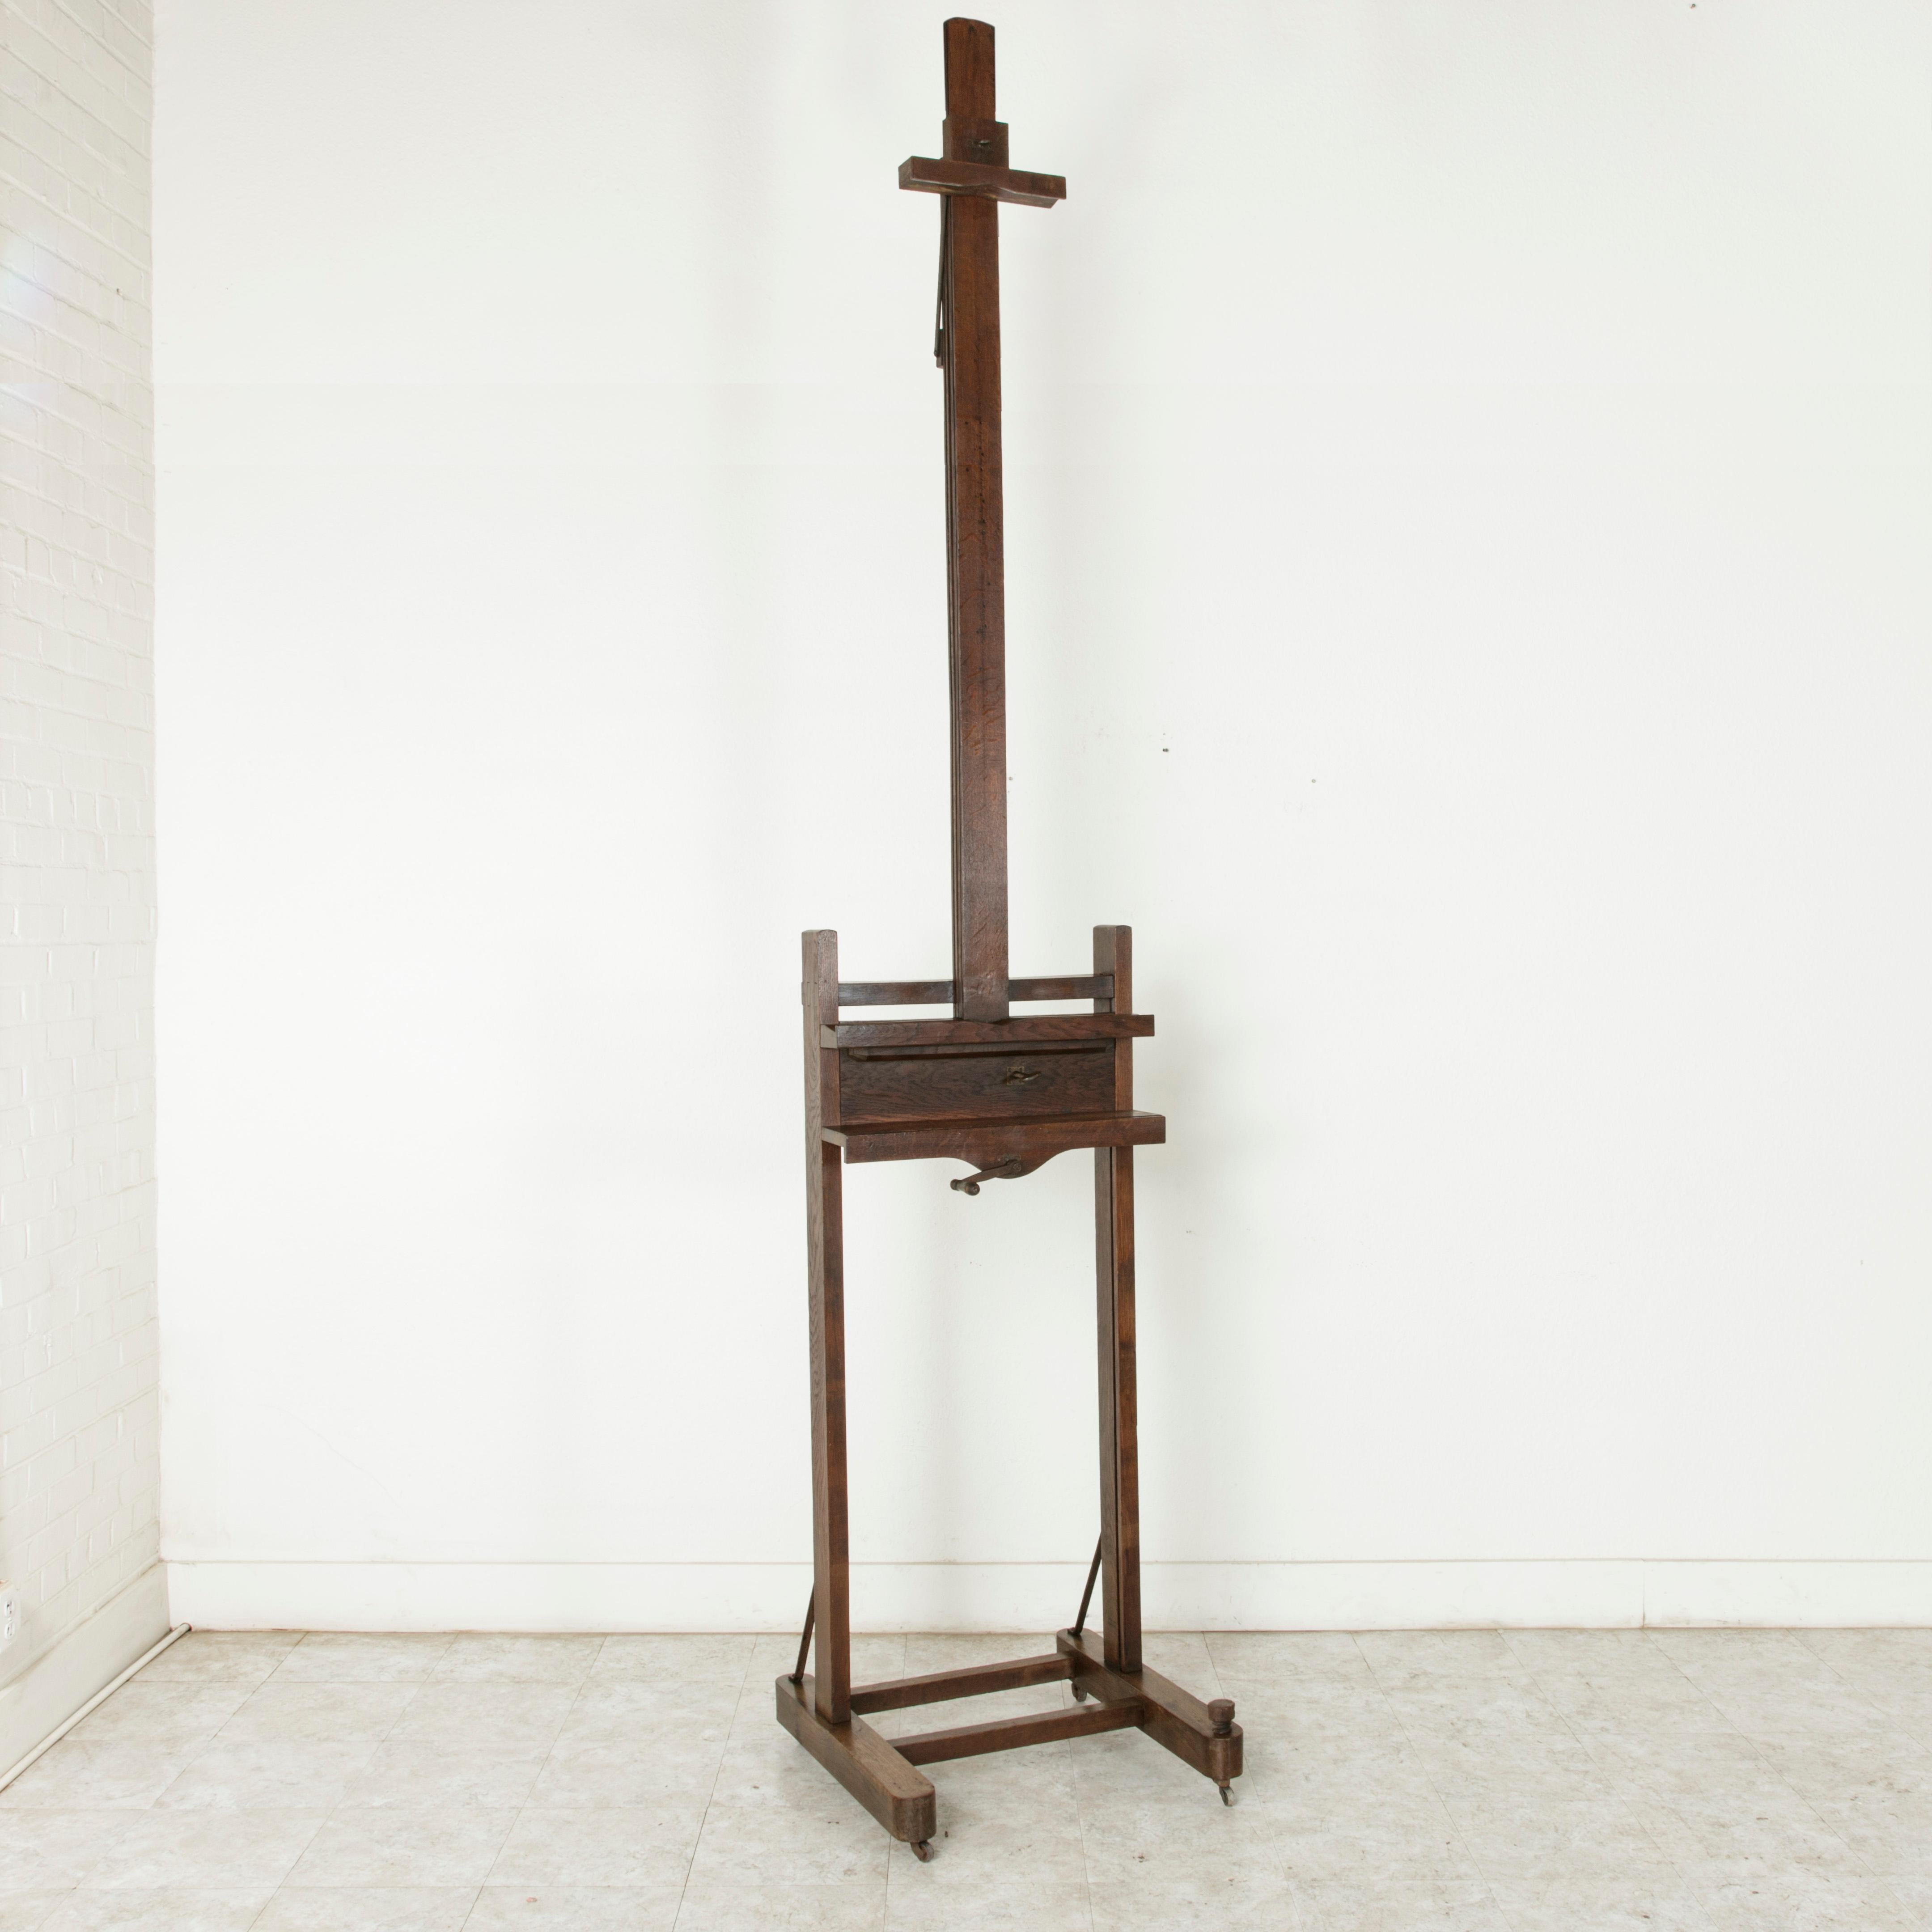 Exceptionally rare! This very large oak floor easel from the late 19th century was originally used in a French gallery for exhibiting art. An extraordinary find, this easel features a double mechanism, with a crank allowing for the height to be